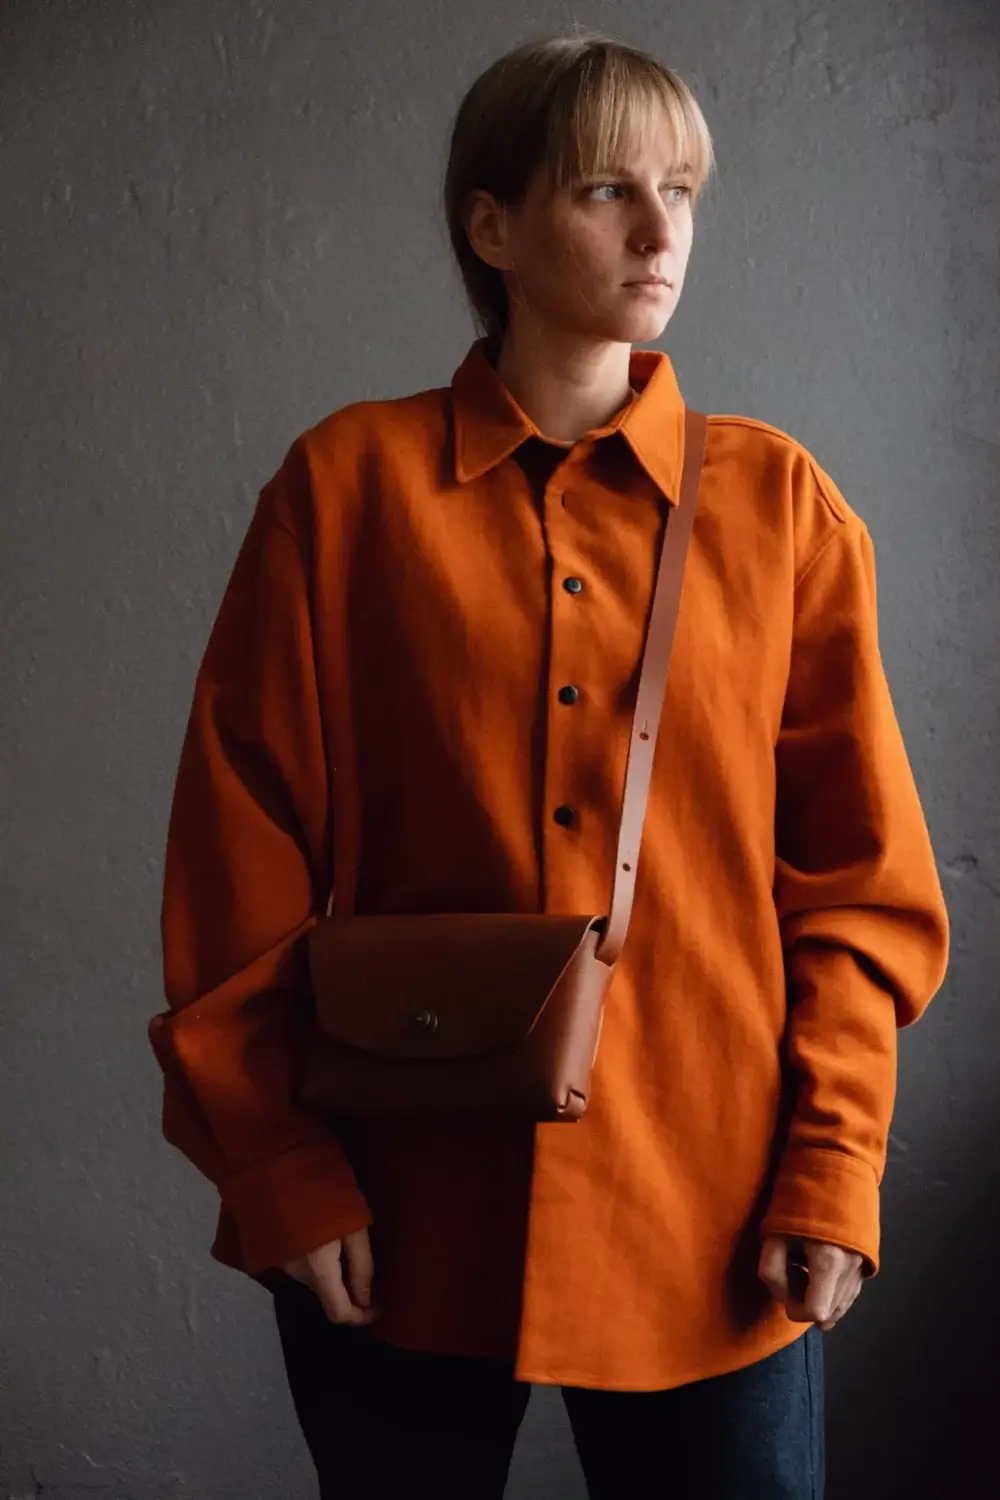 a woman in an orange shirt is holding a brown bag.